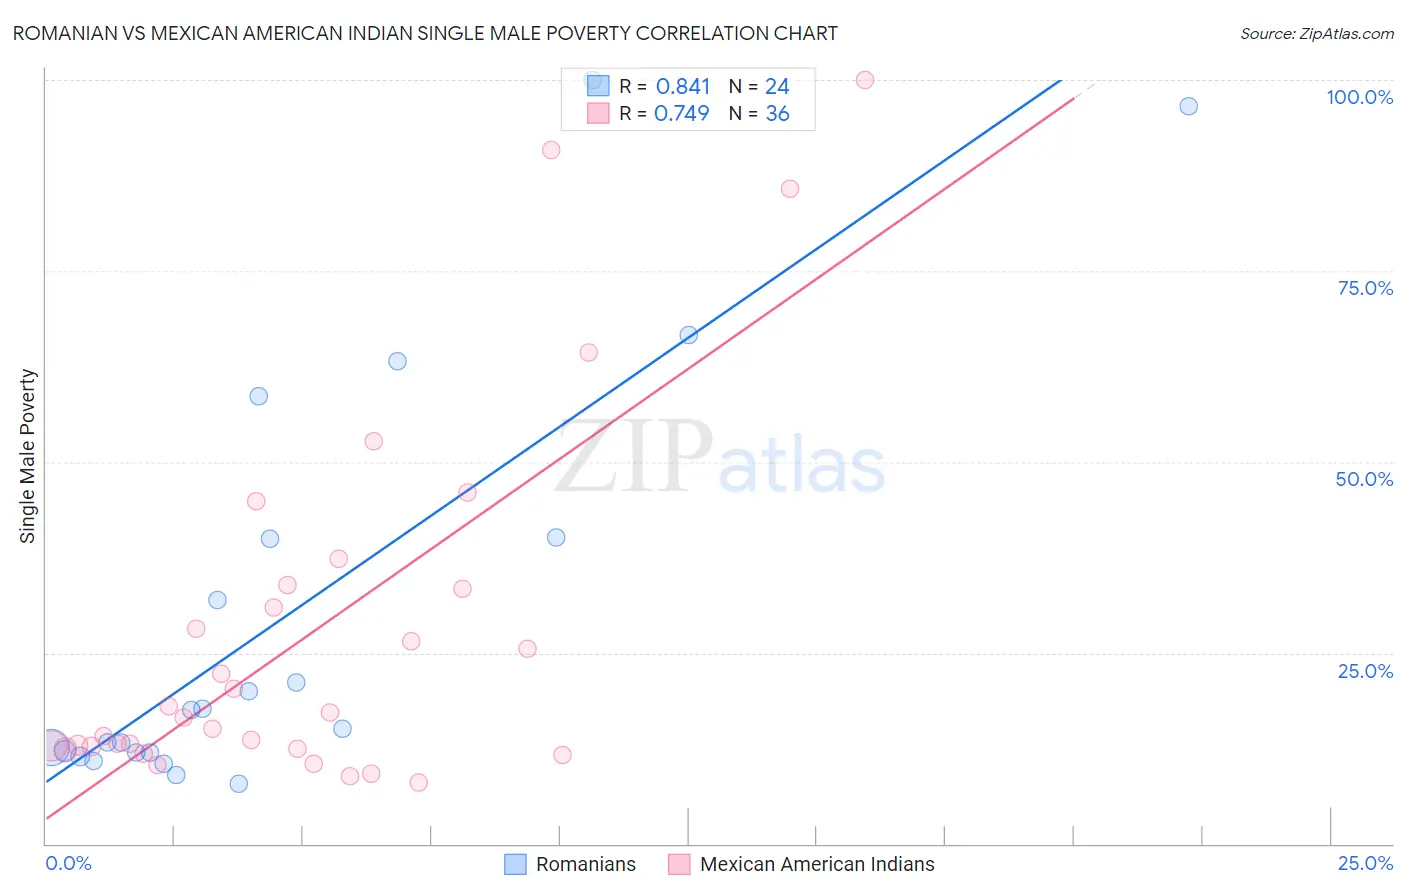 Romanian vs Mexican American Indian Single Male Poverty